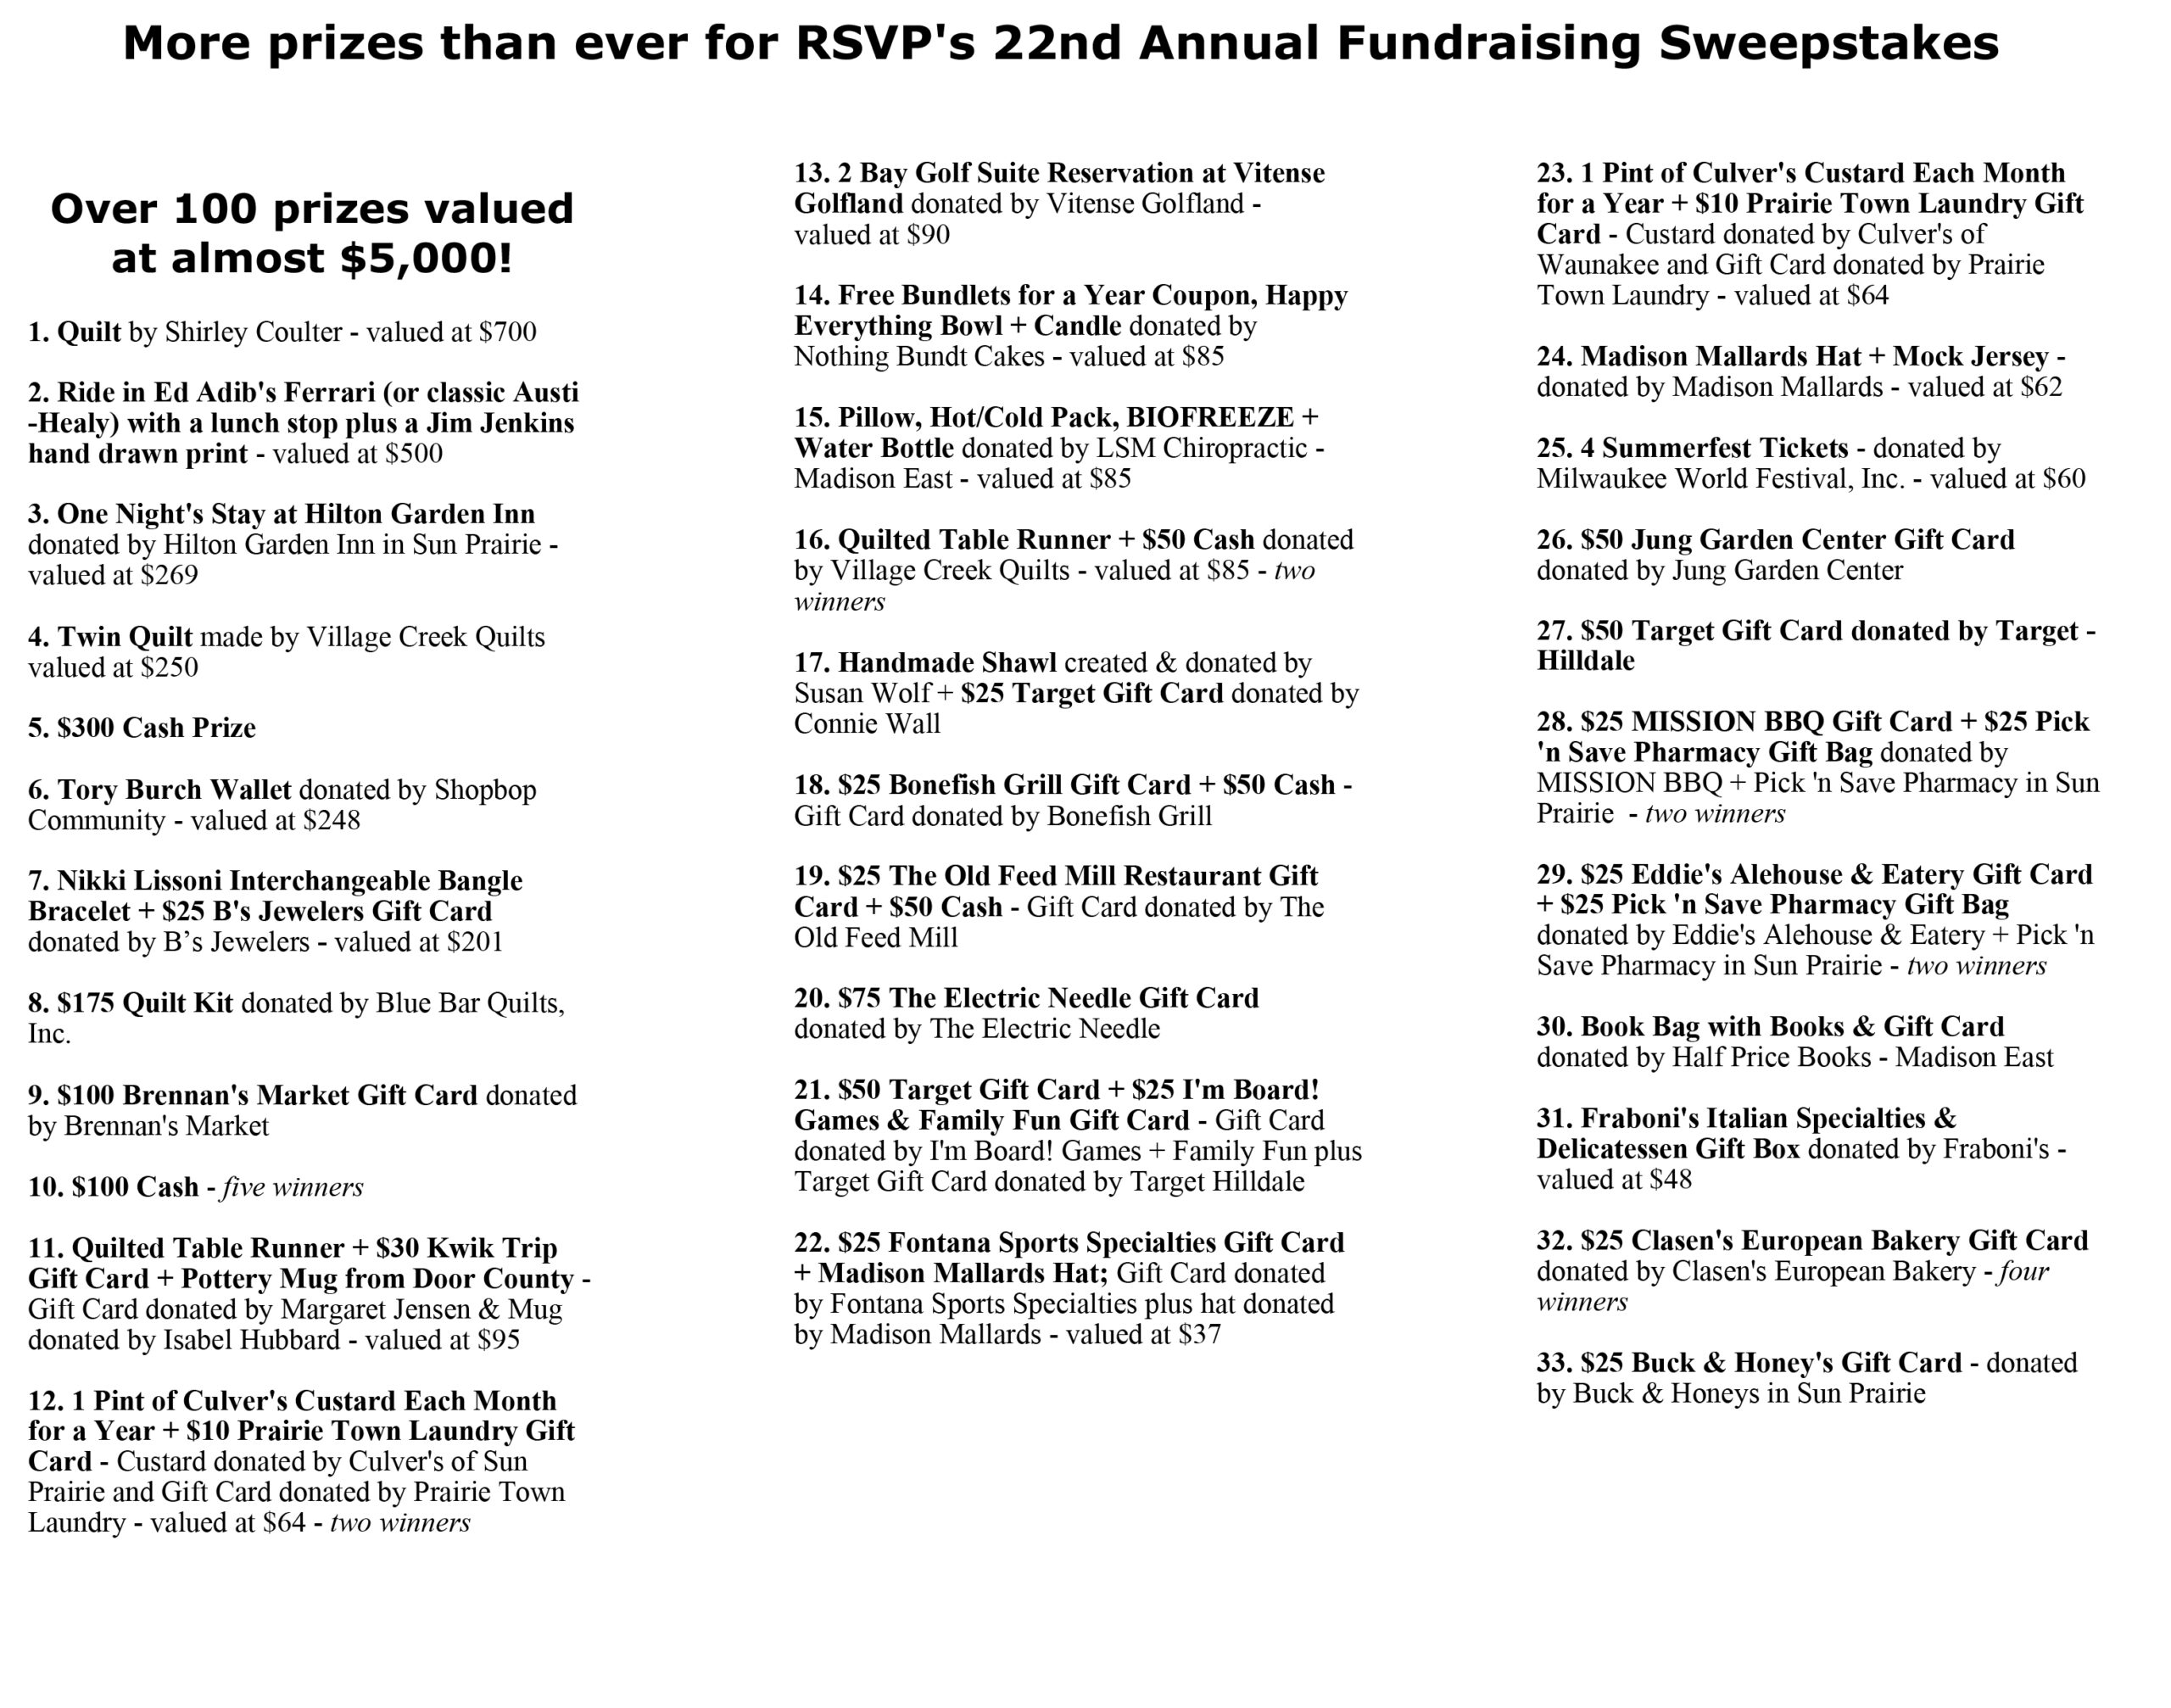 A list of prizes at RSVP's 22nd annual Sweepstakes fundraiser 